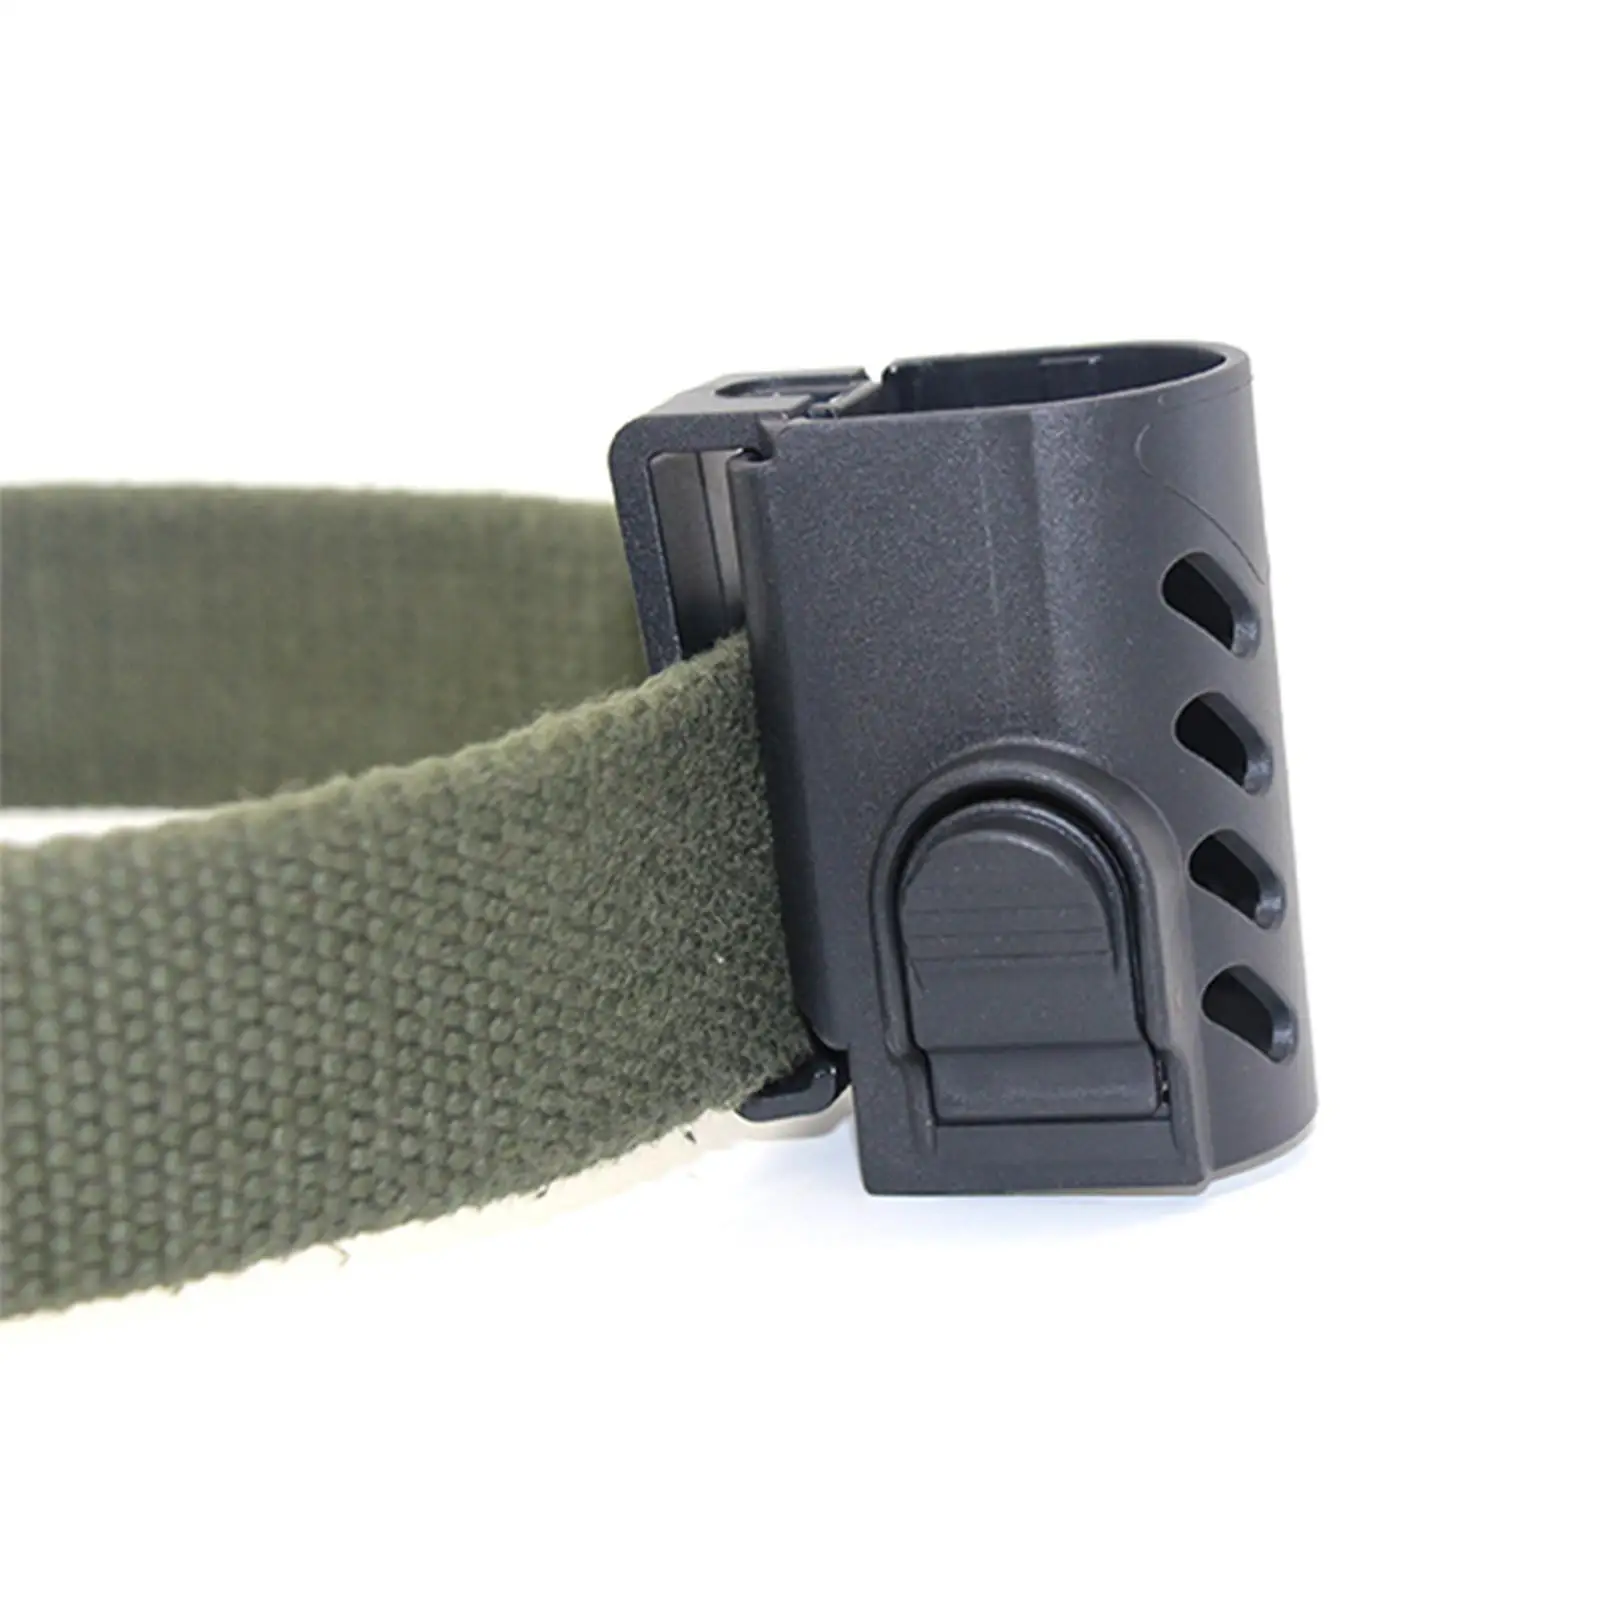 Flashlight Case Holder, Easy to Install Torch Pouch Protective Side Lock System Quick Pull Plastic Belt Clip for Outdoor